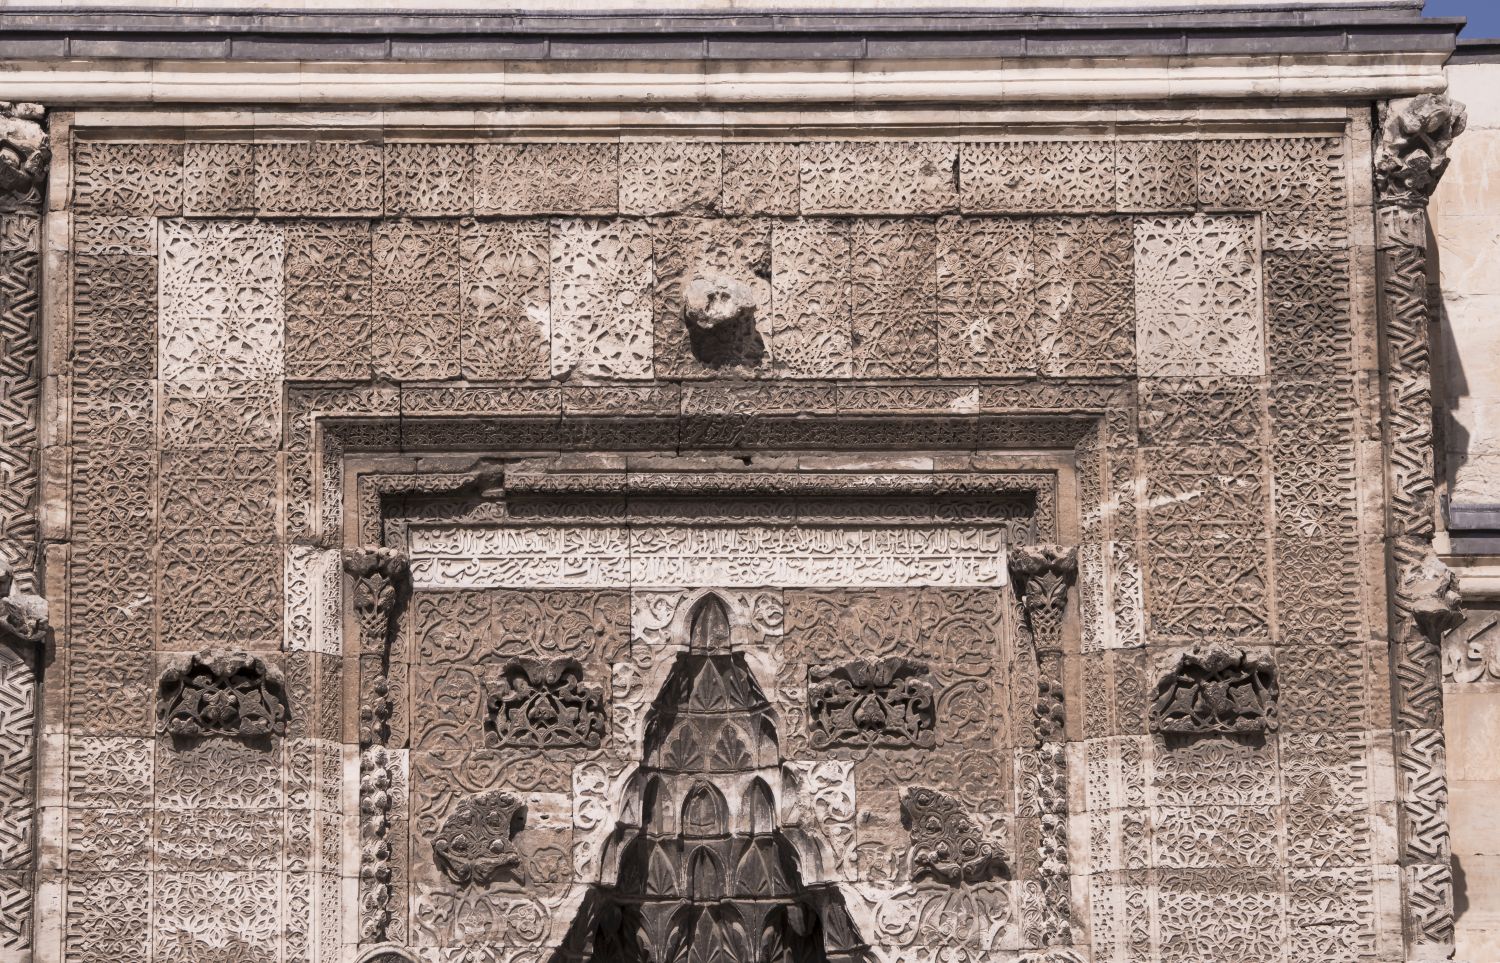 Entrance portal: view of upper half of facade showing geometric ornament.